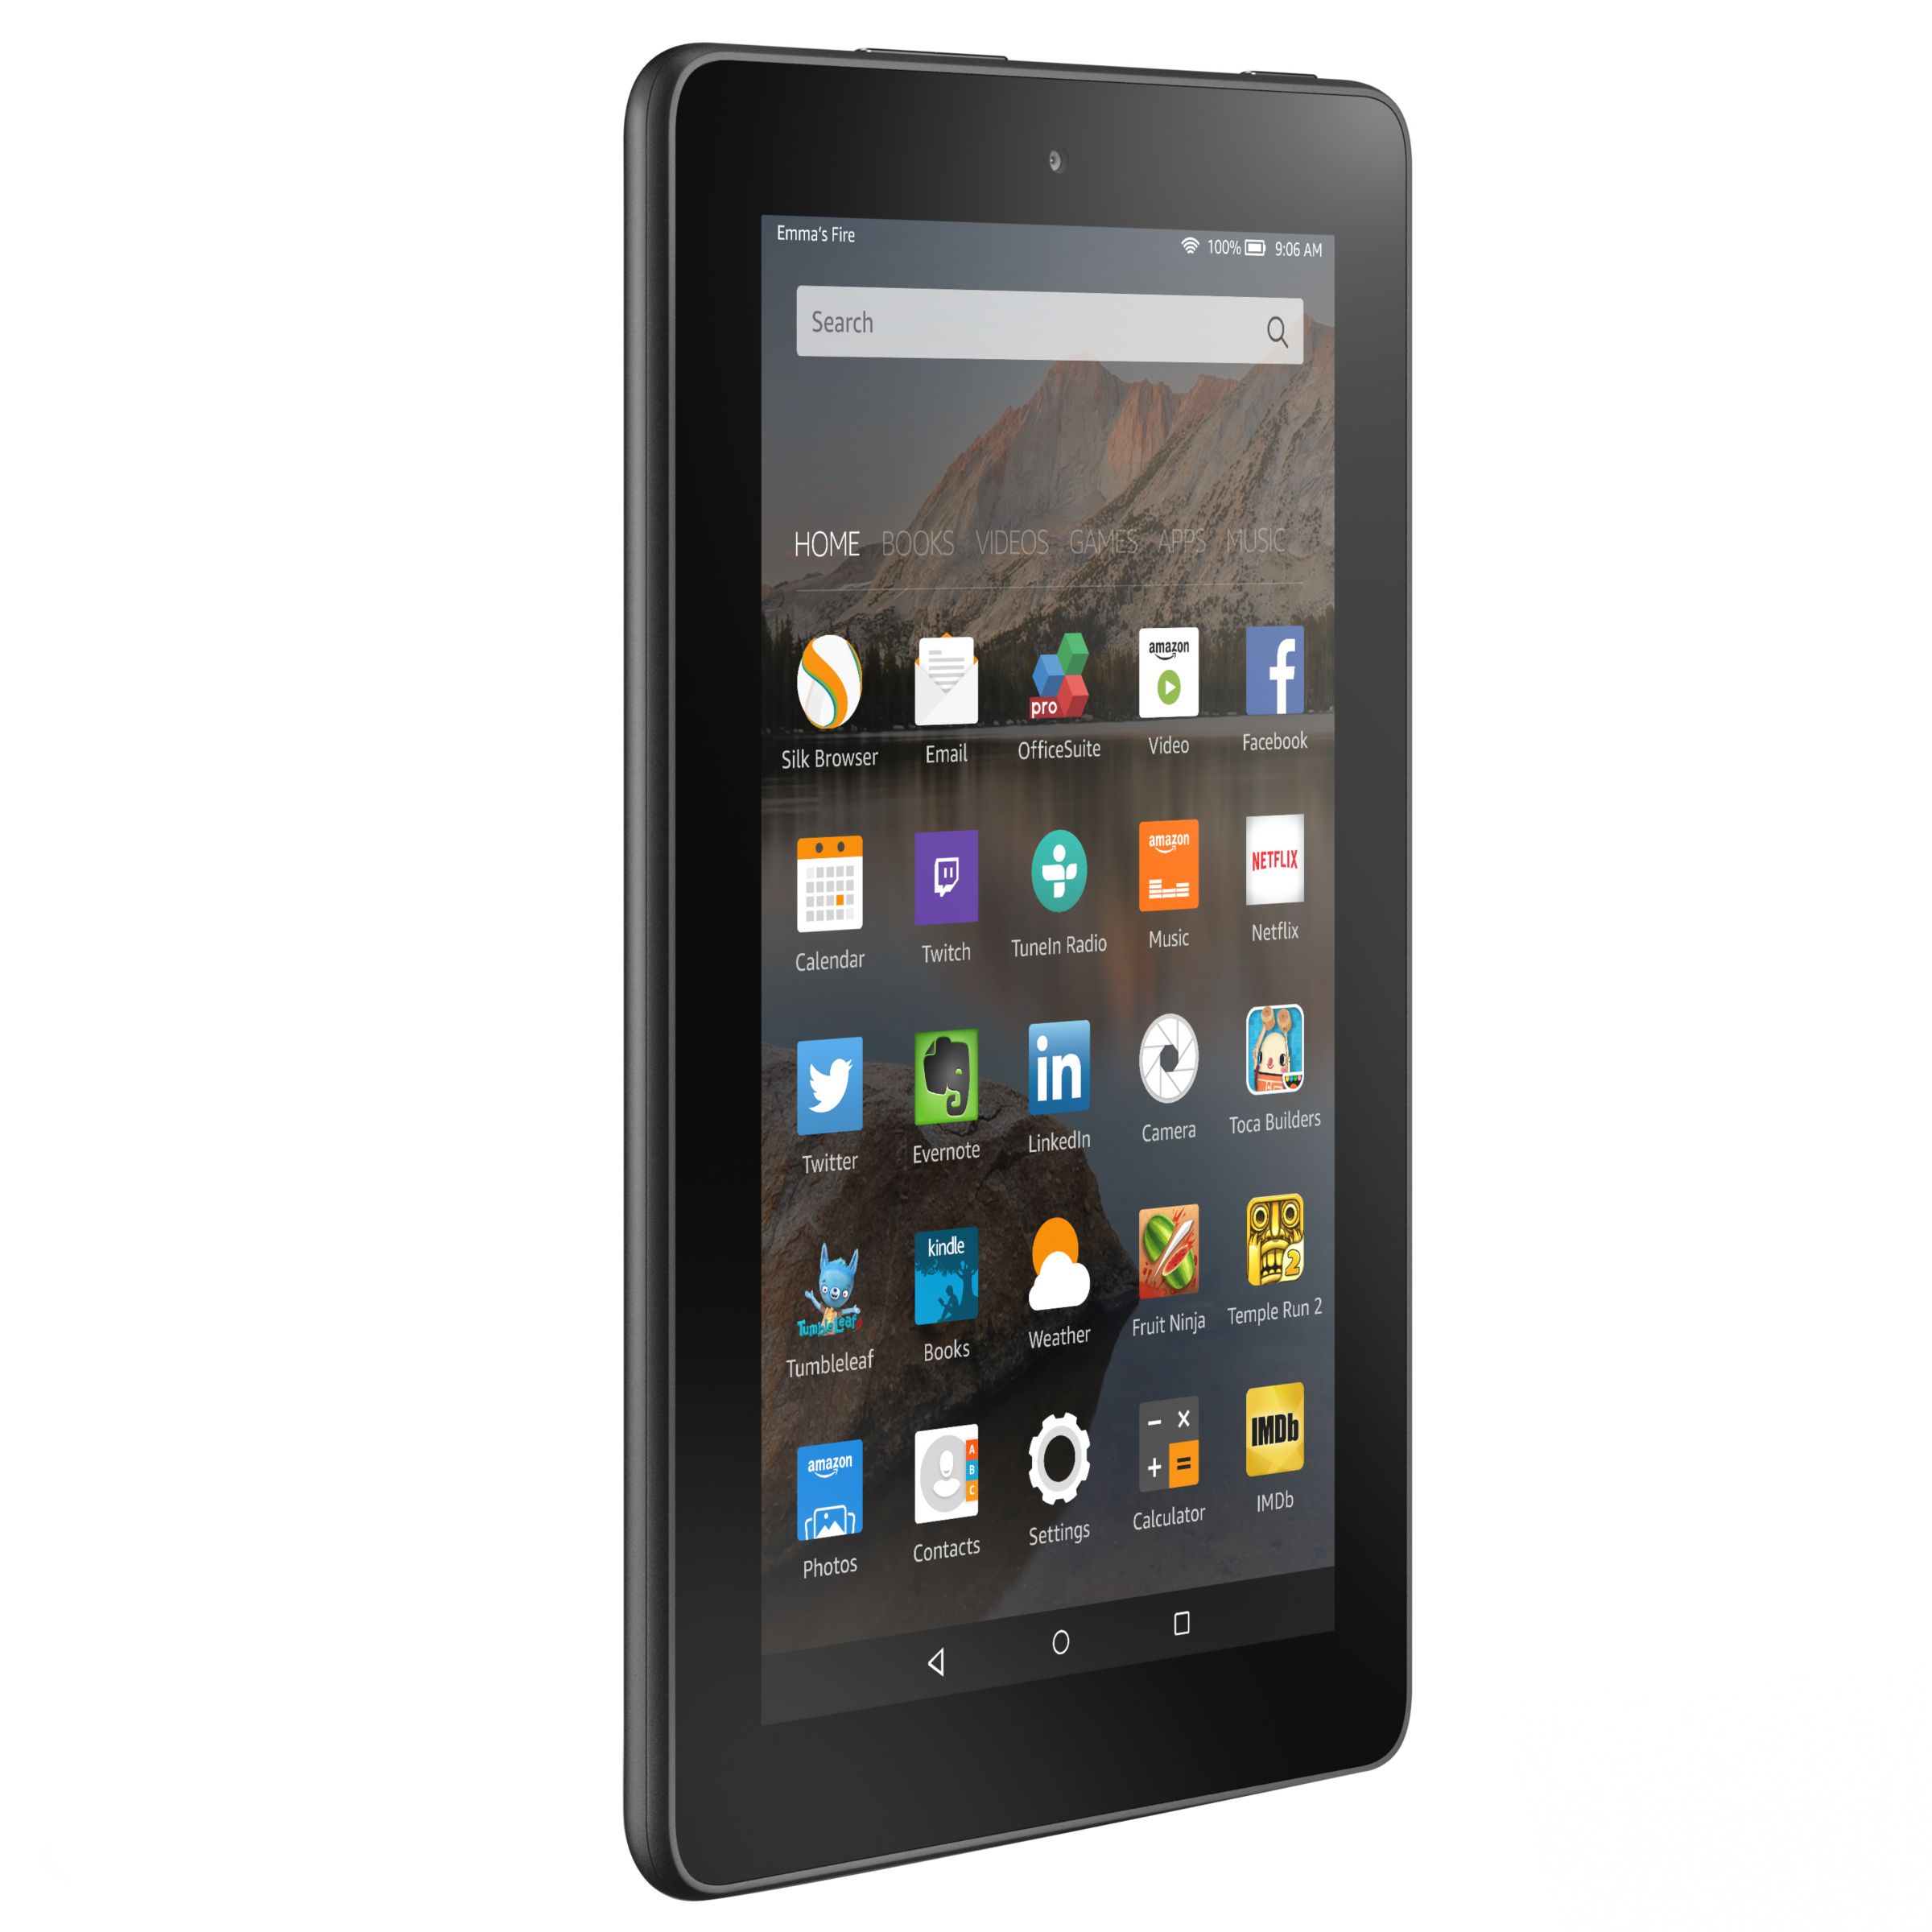 Amazon Fire 7 Tablet, Quad-core, Fire OS, 7", Wi-Fi, 16GB